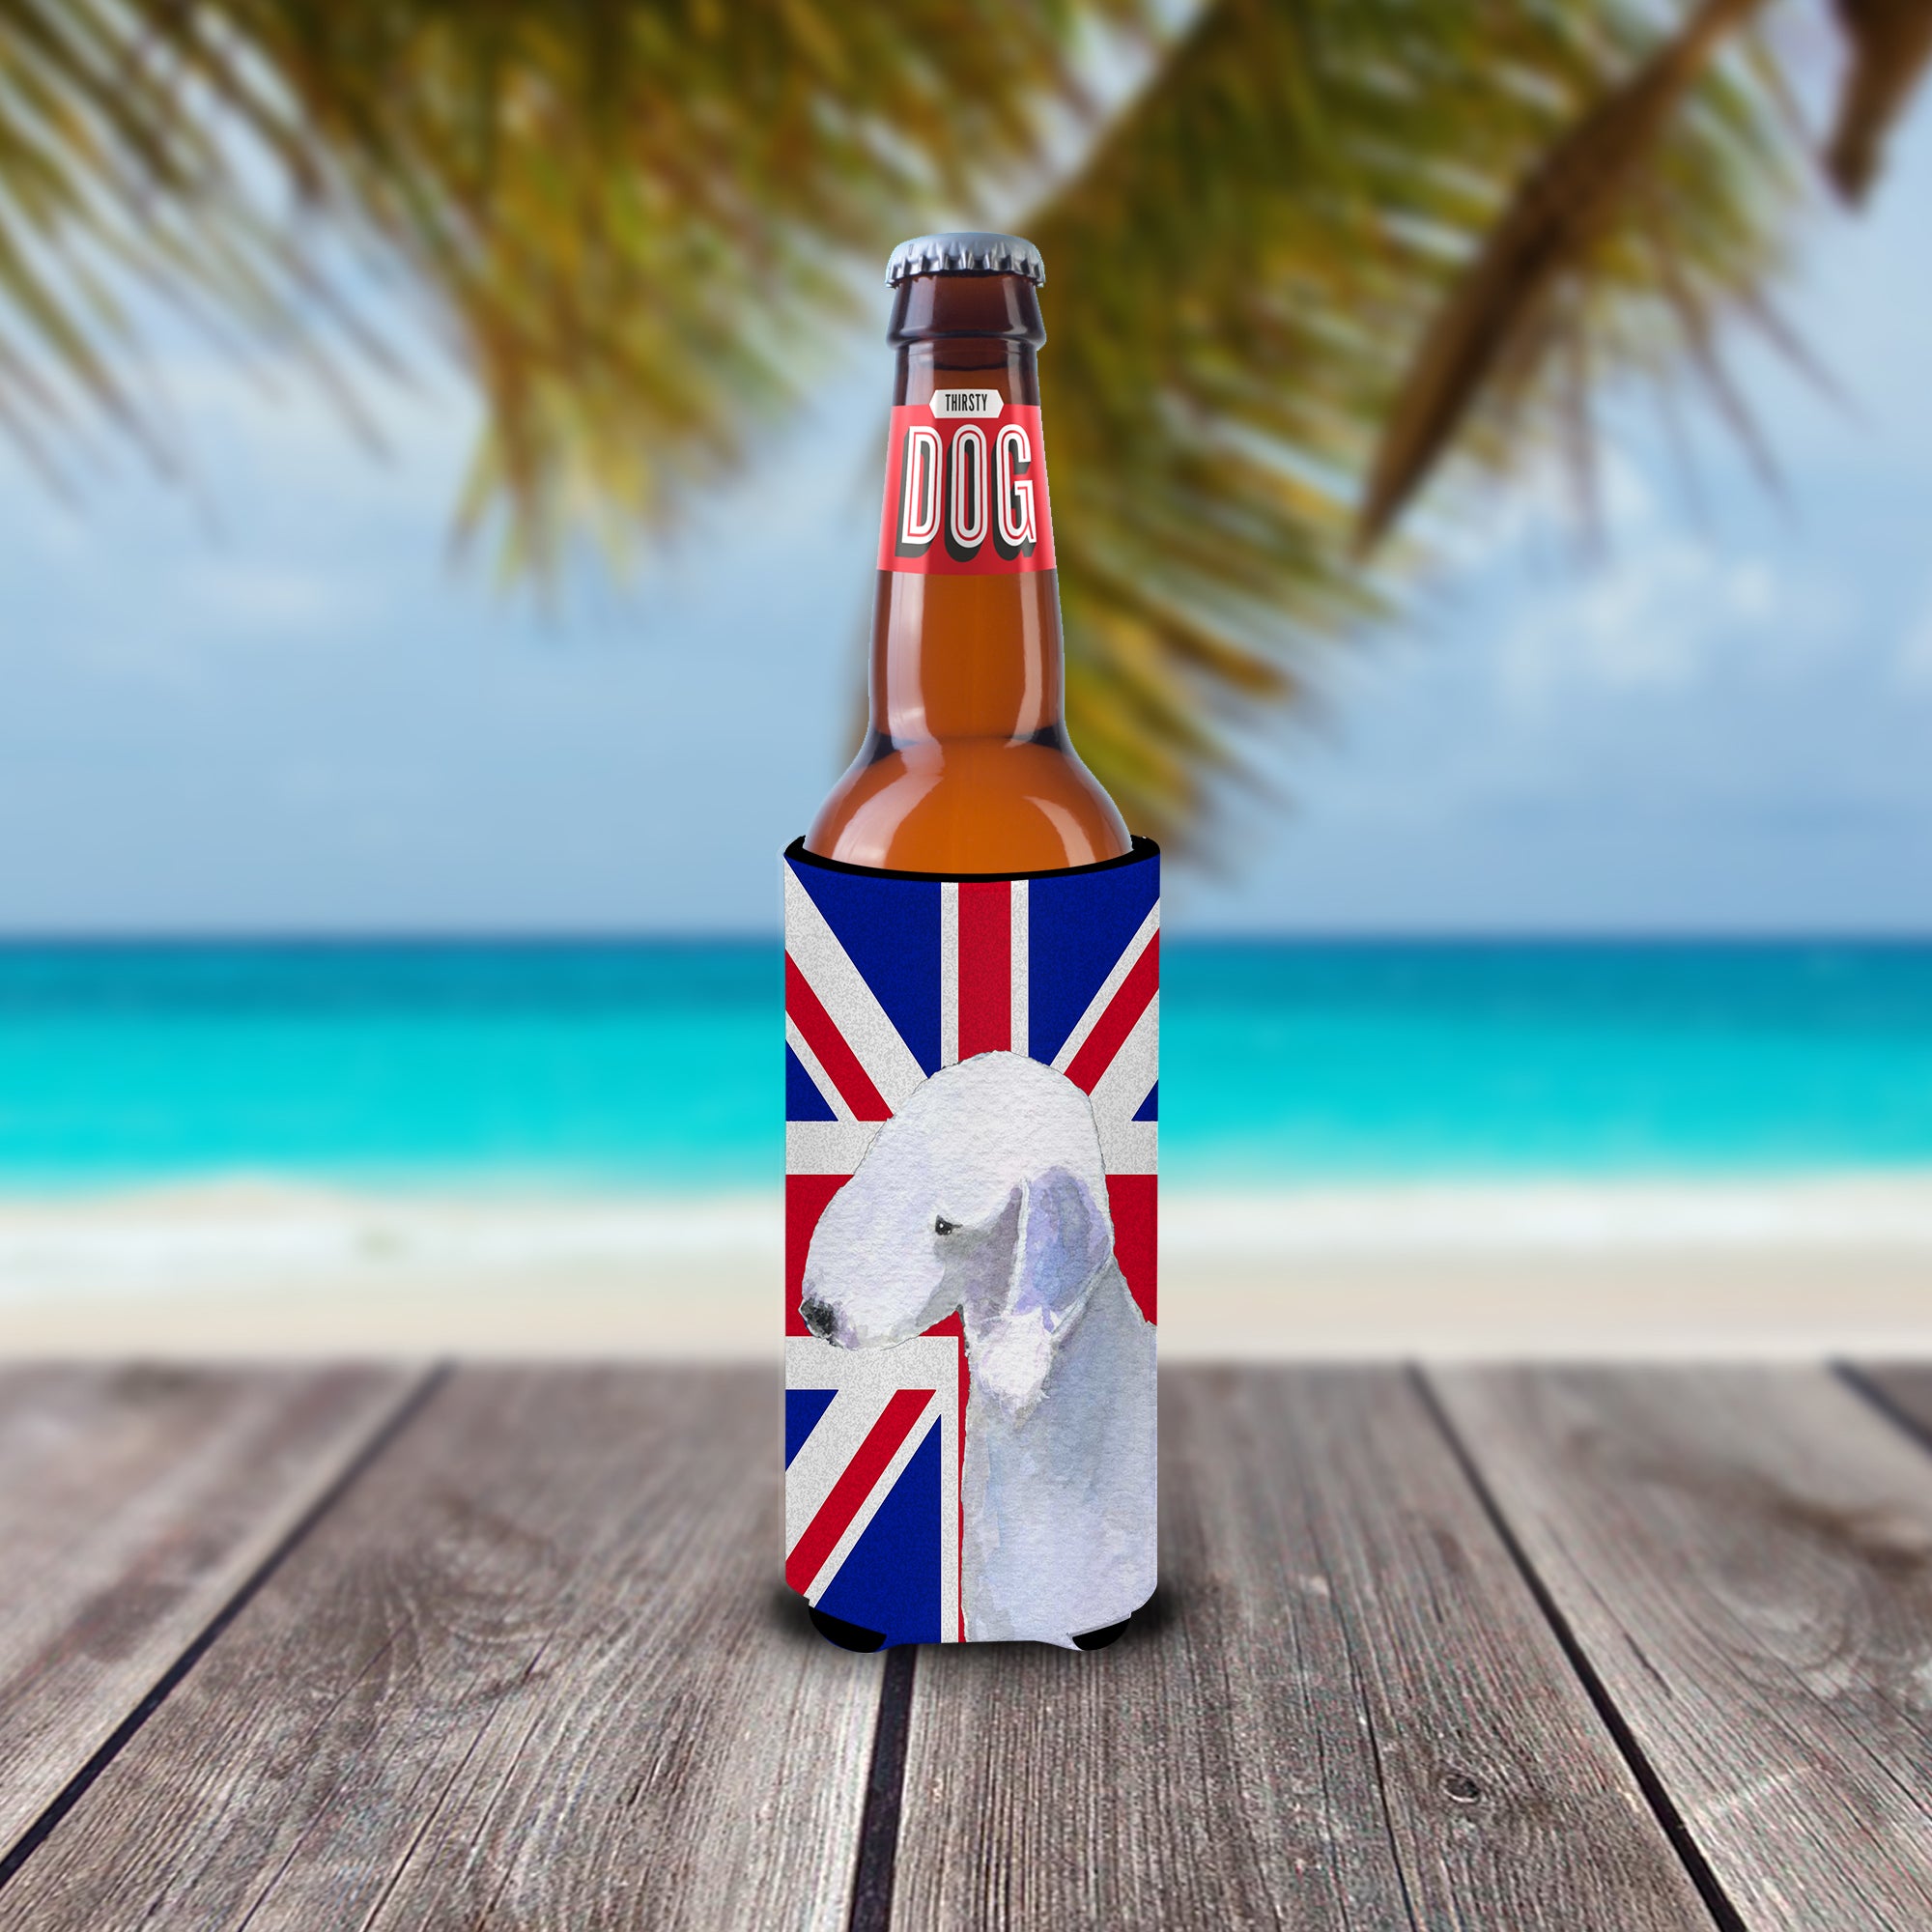 Bedlington Terrier with English Union Jack British Flag Ultra Beverage Insulators for slim cans SS4925MUK